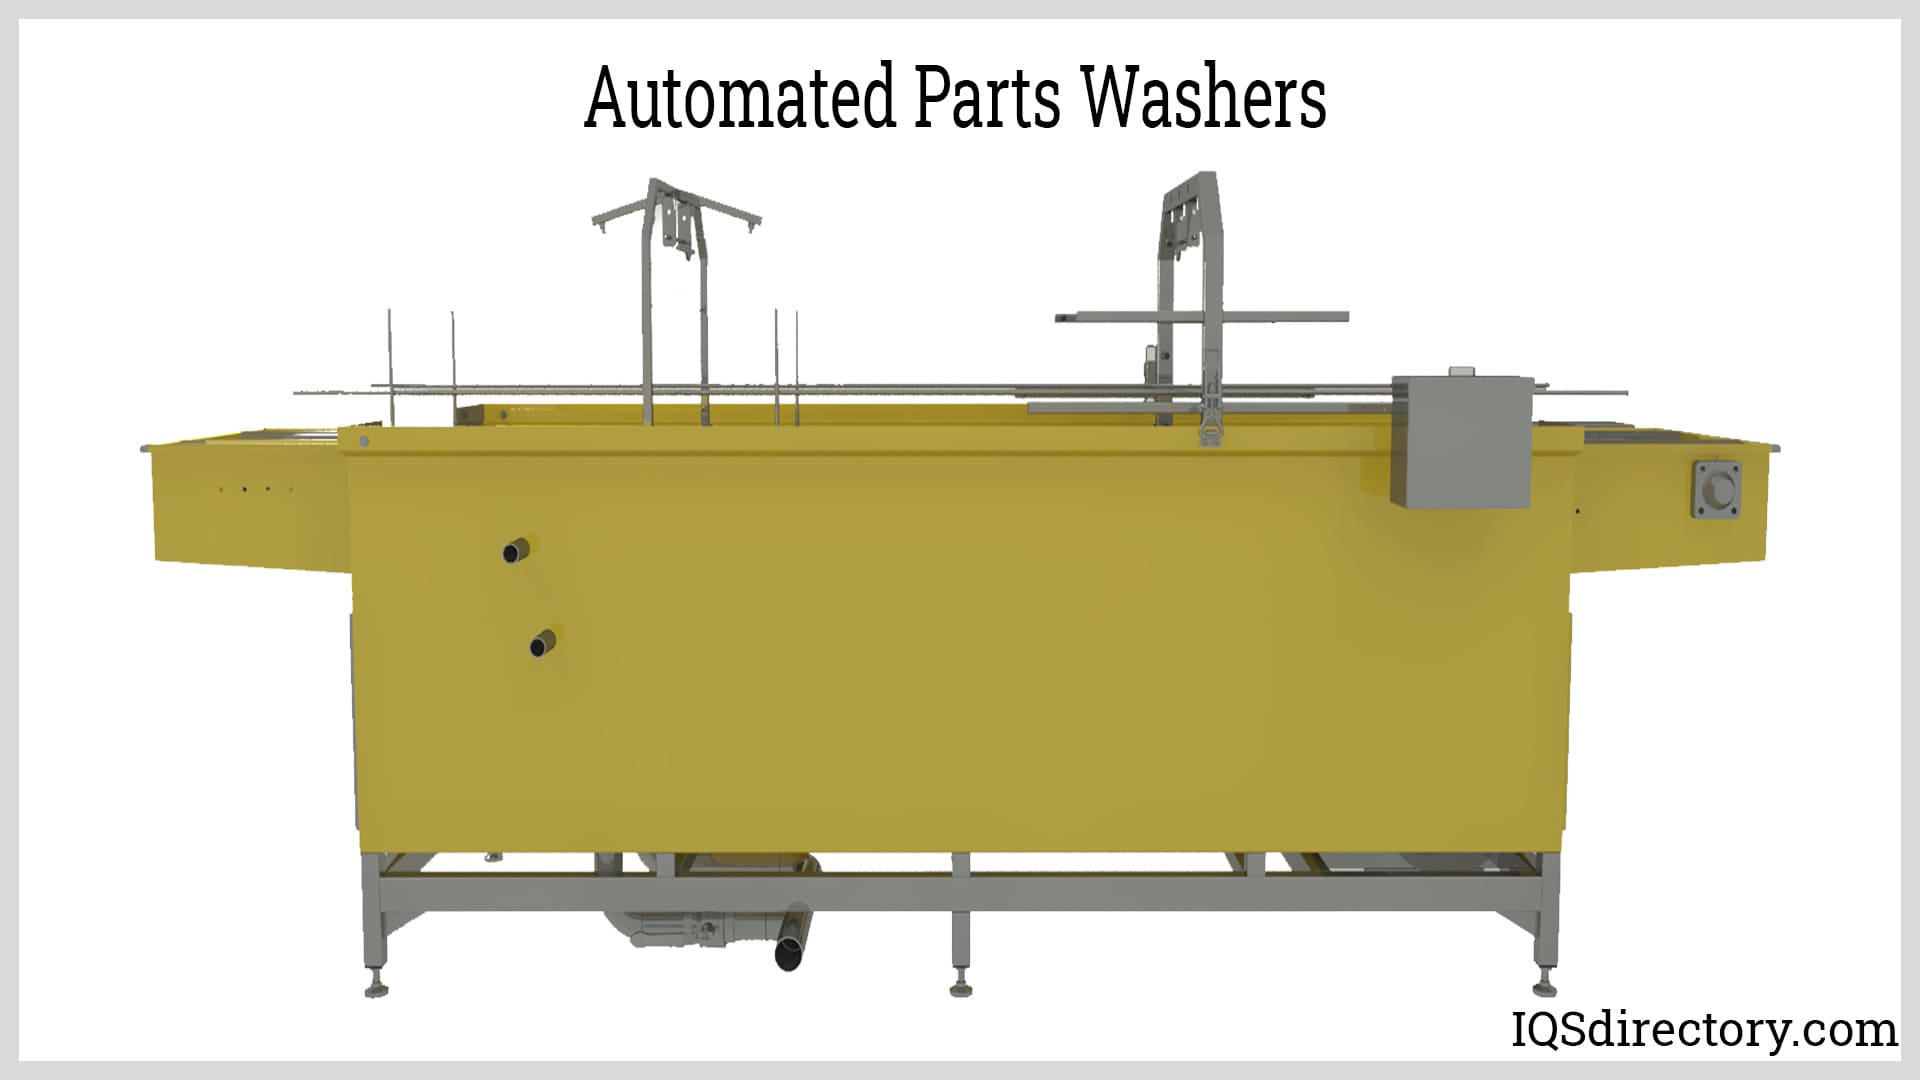 Automated Parts Washers